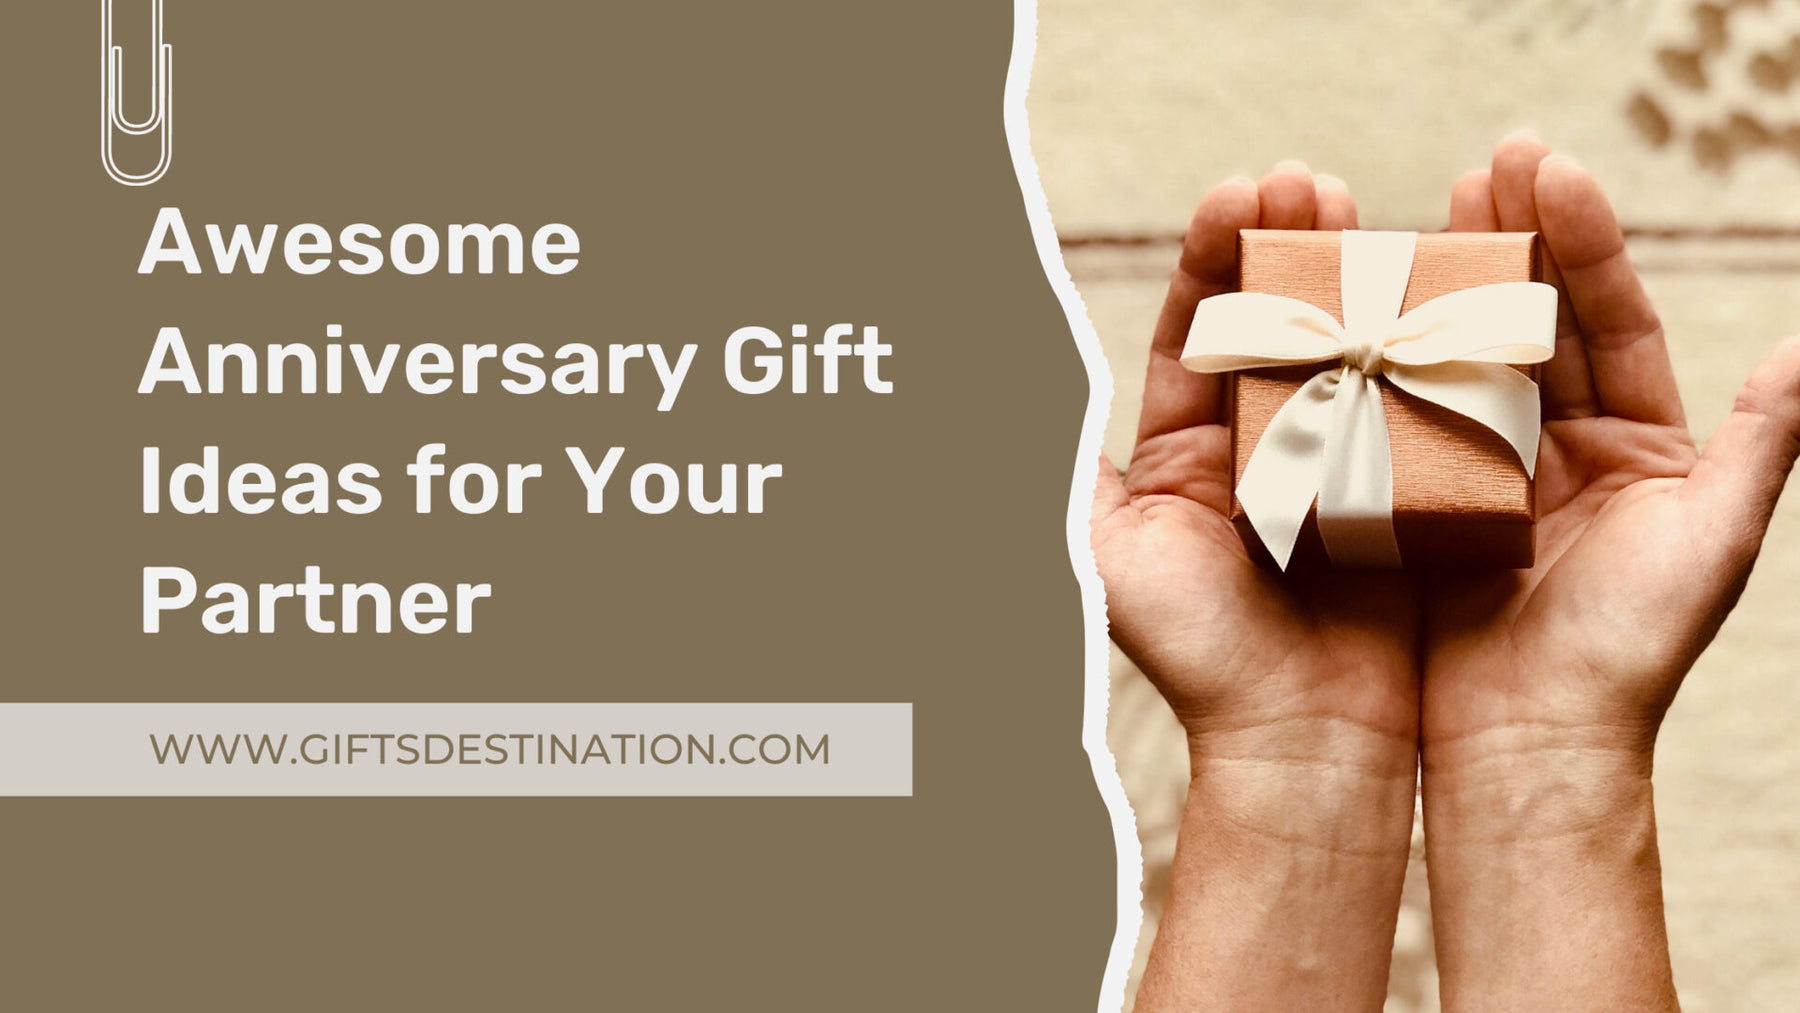 Awesome Anniversary Gift Ideas for Your Partner